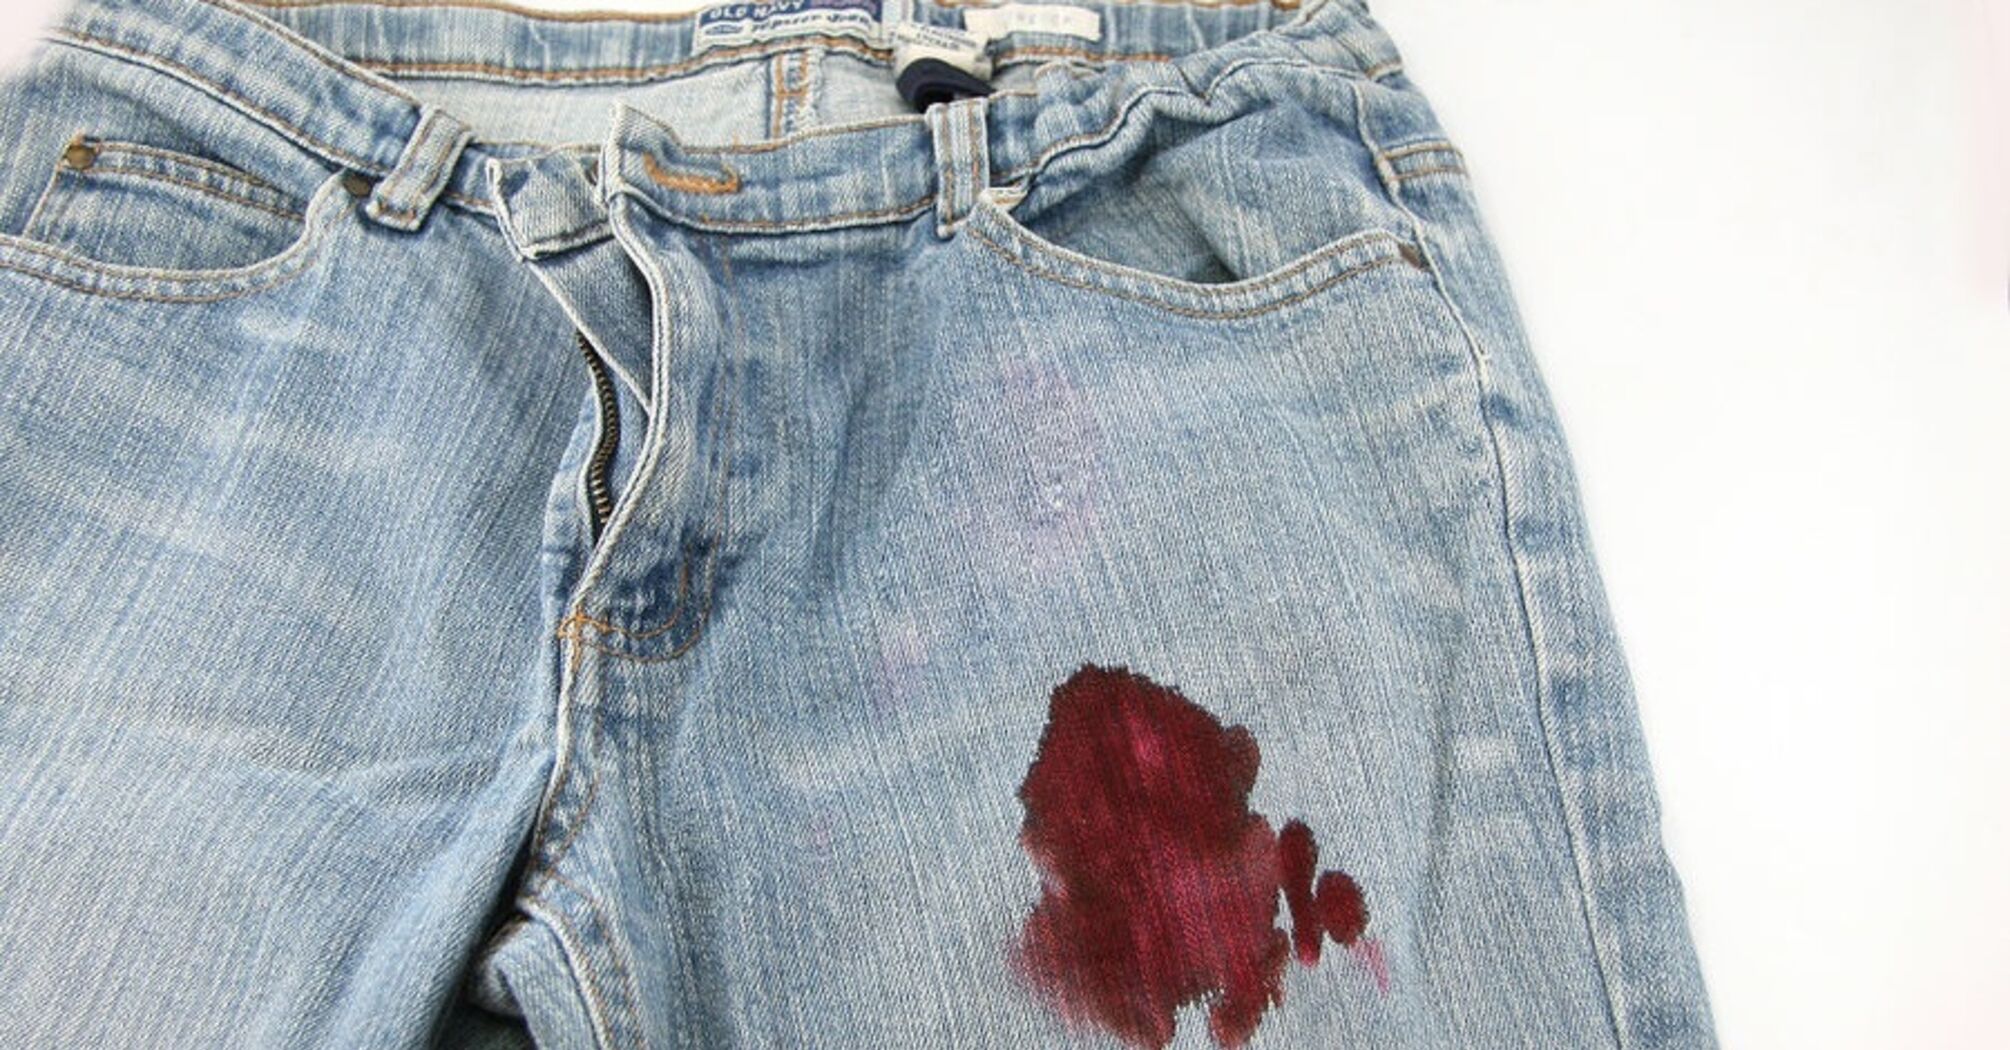 How to get dried blood out of denim jeans? : r/NoStupidQuestions